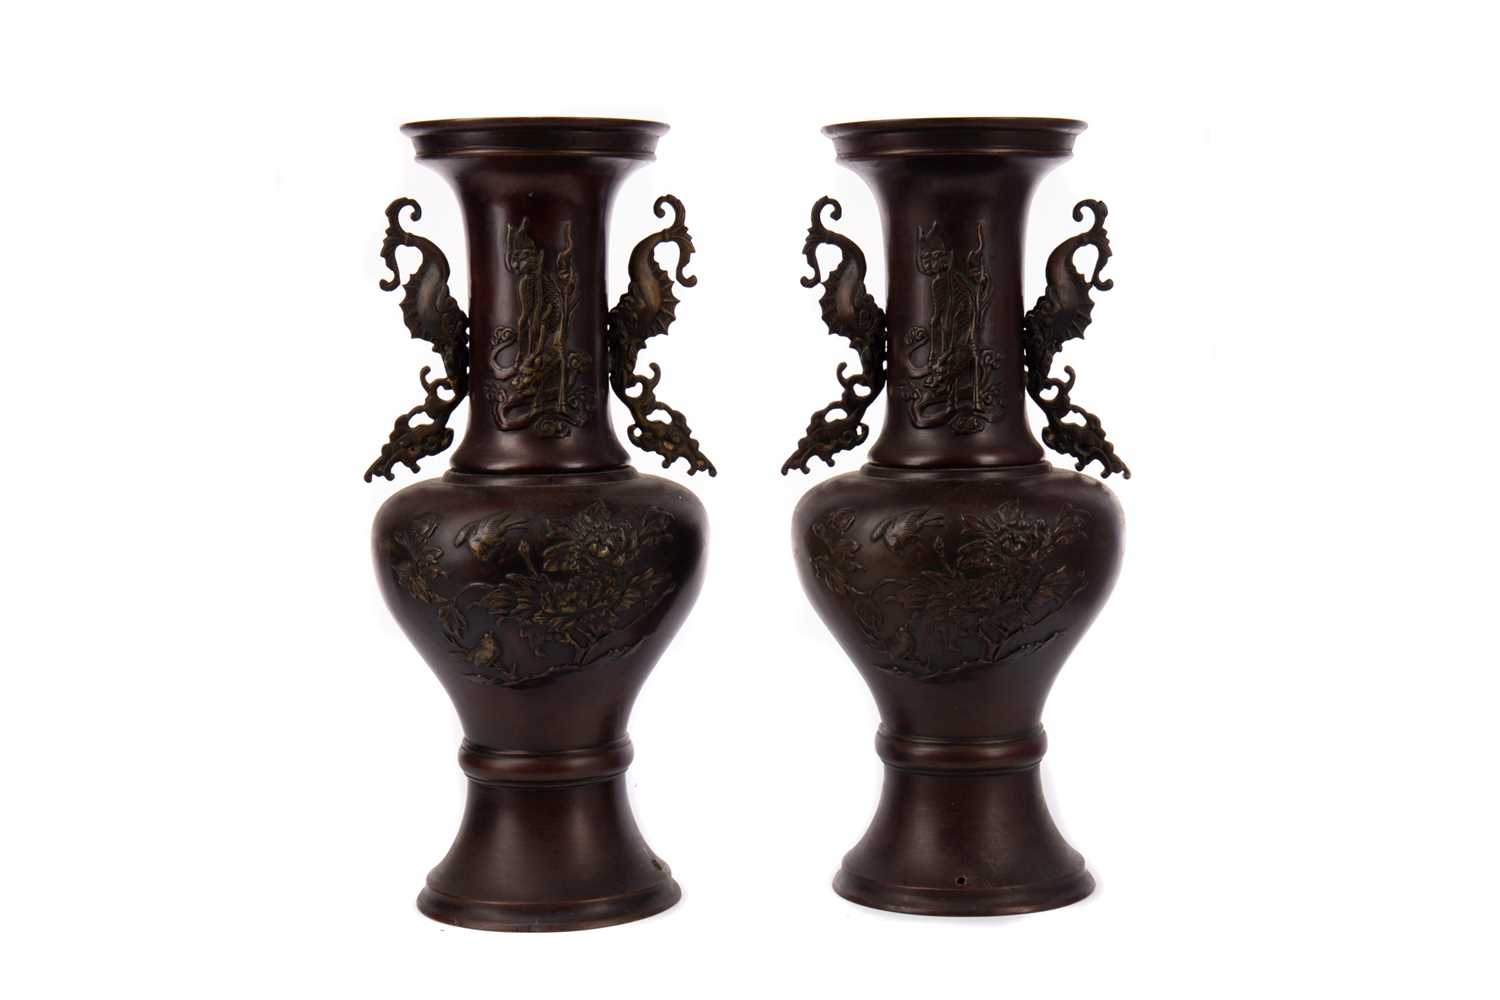 Lot 1805 - A PAIR OF 20TH CENTURY CHINESE BRONZE VASES